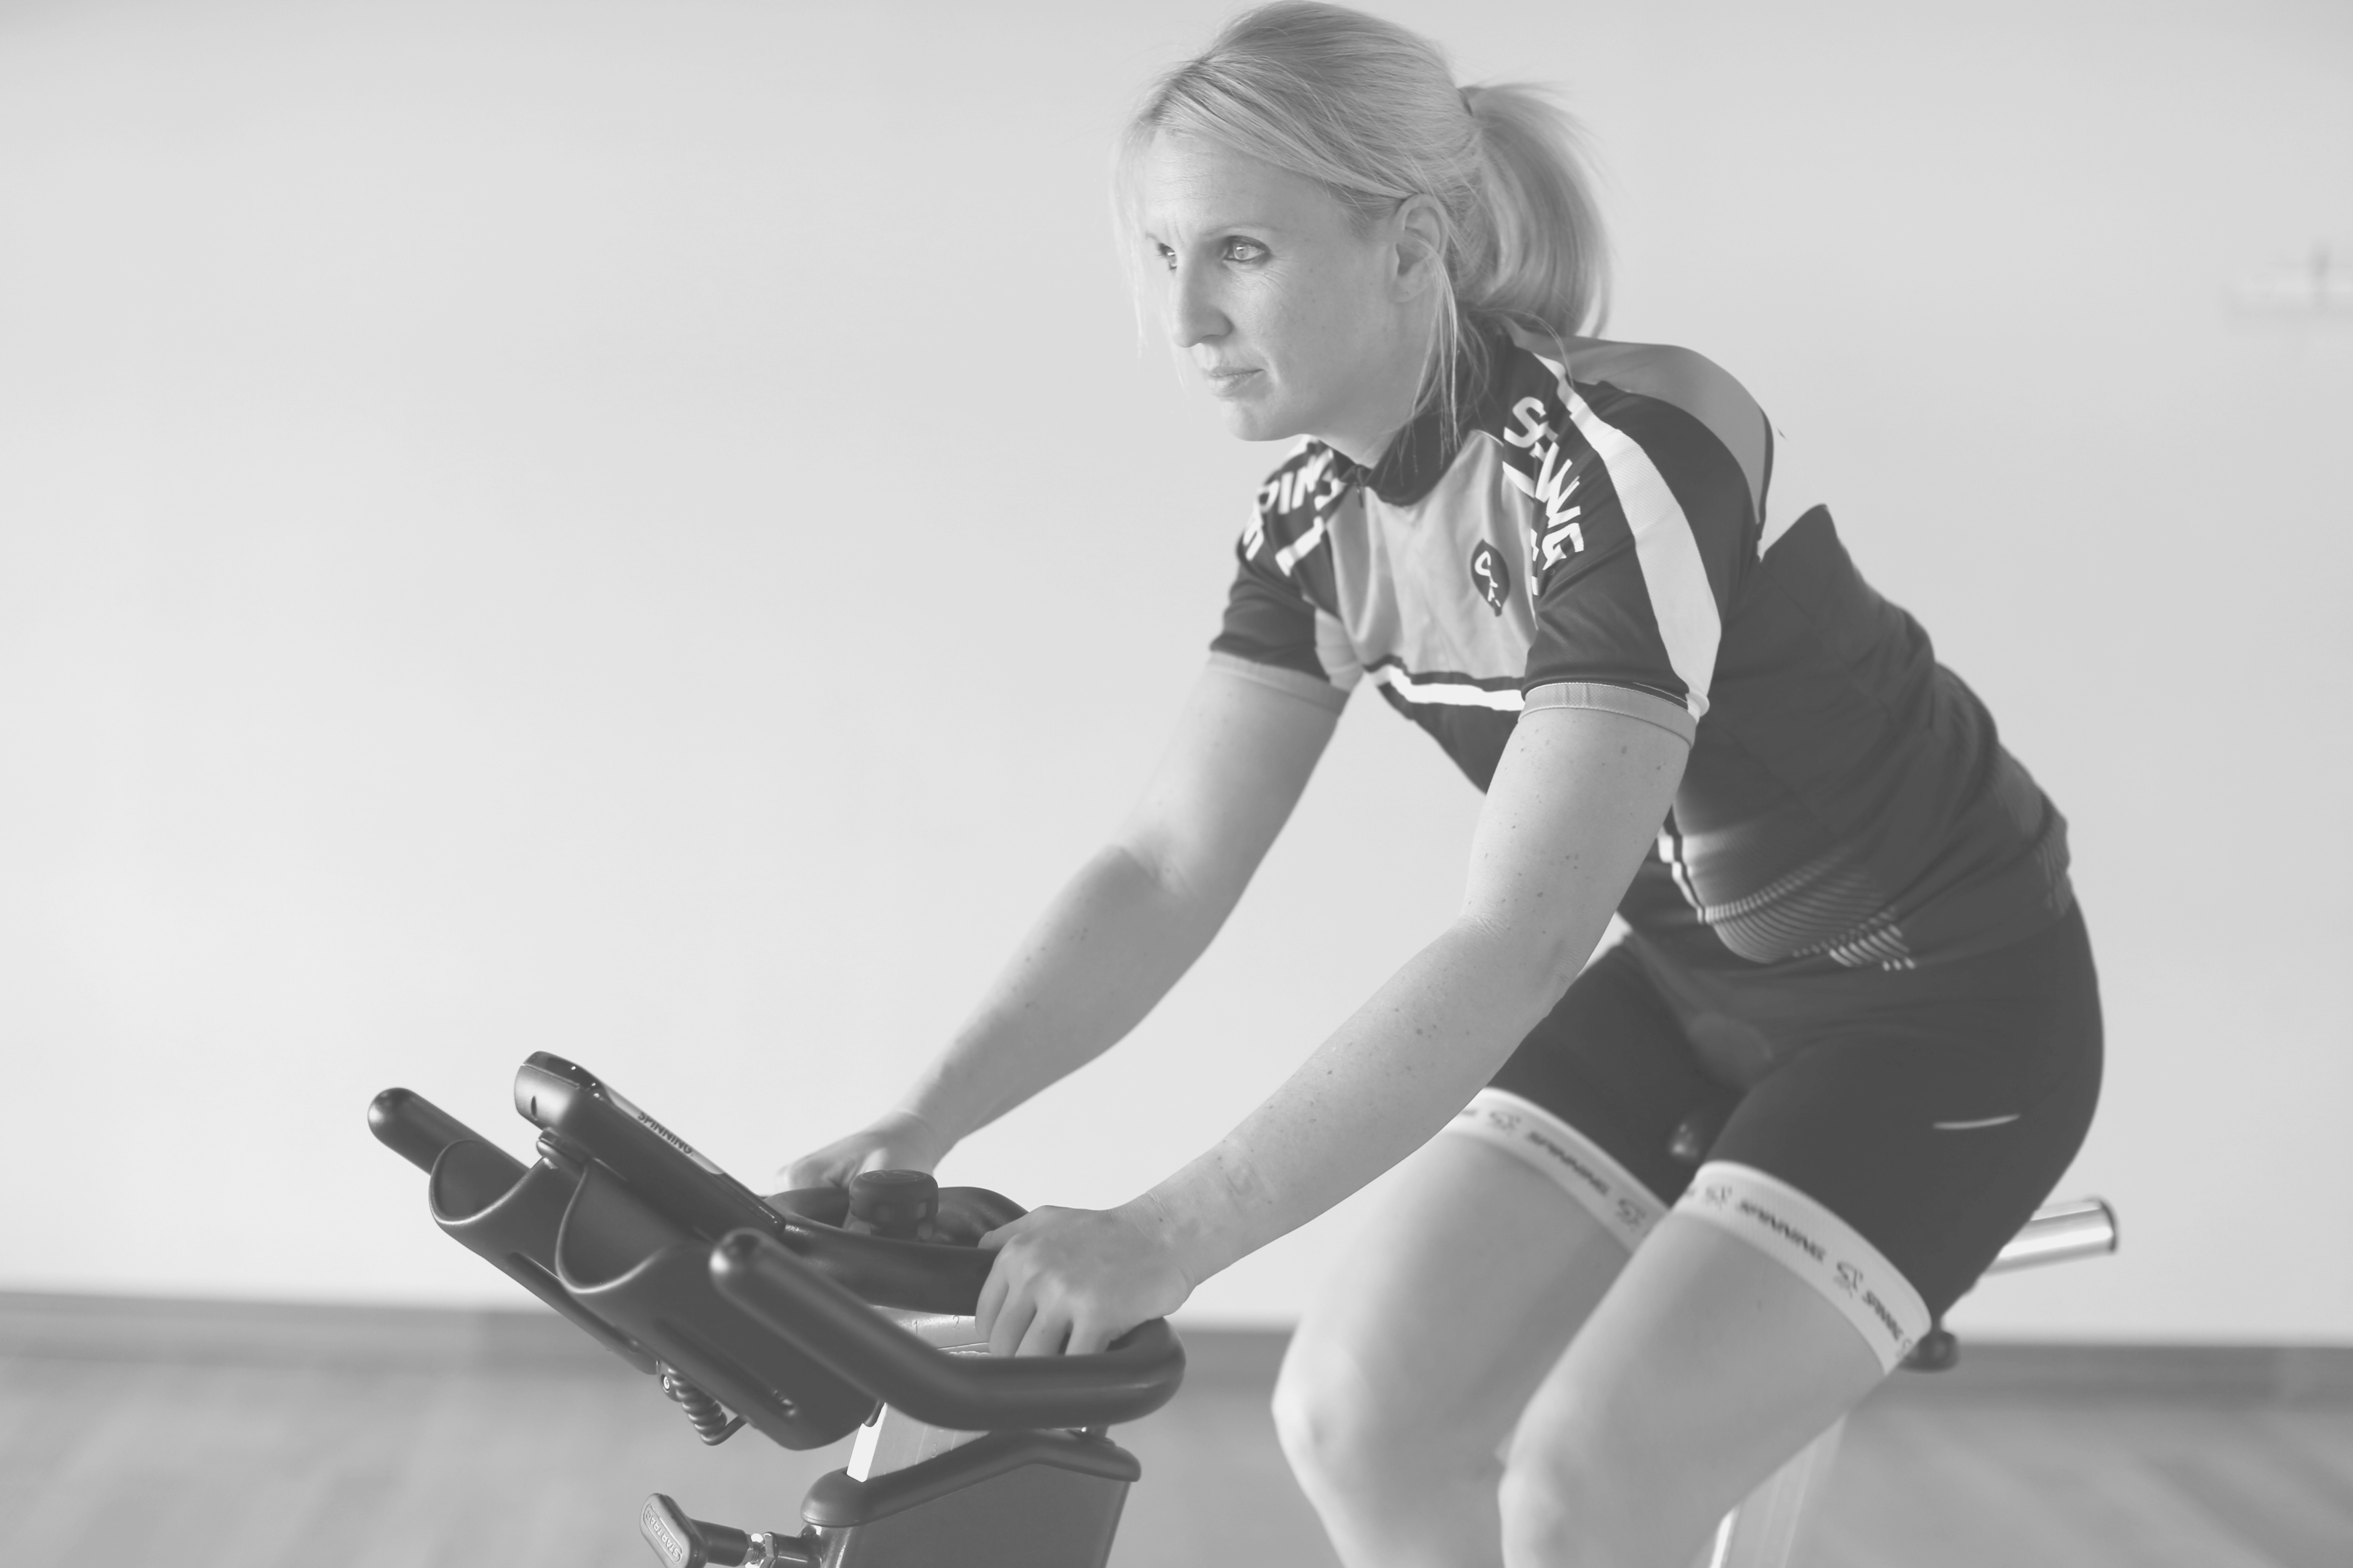 Indoor Cycling, Spinning